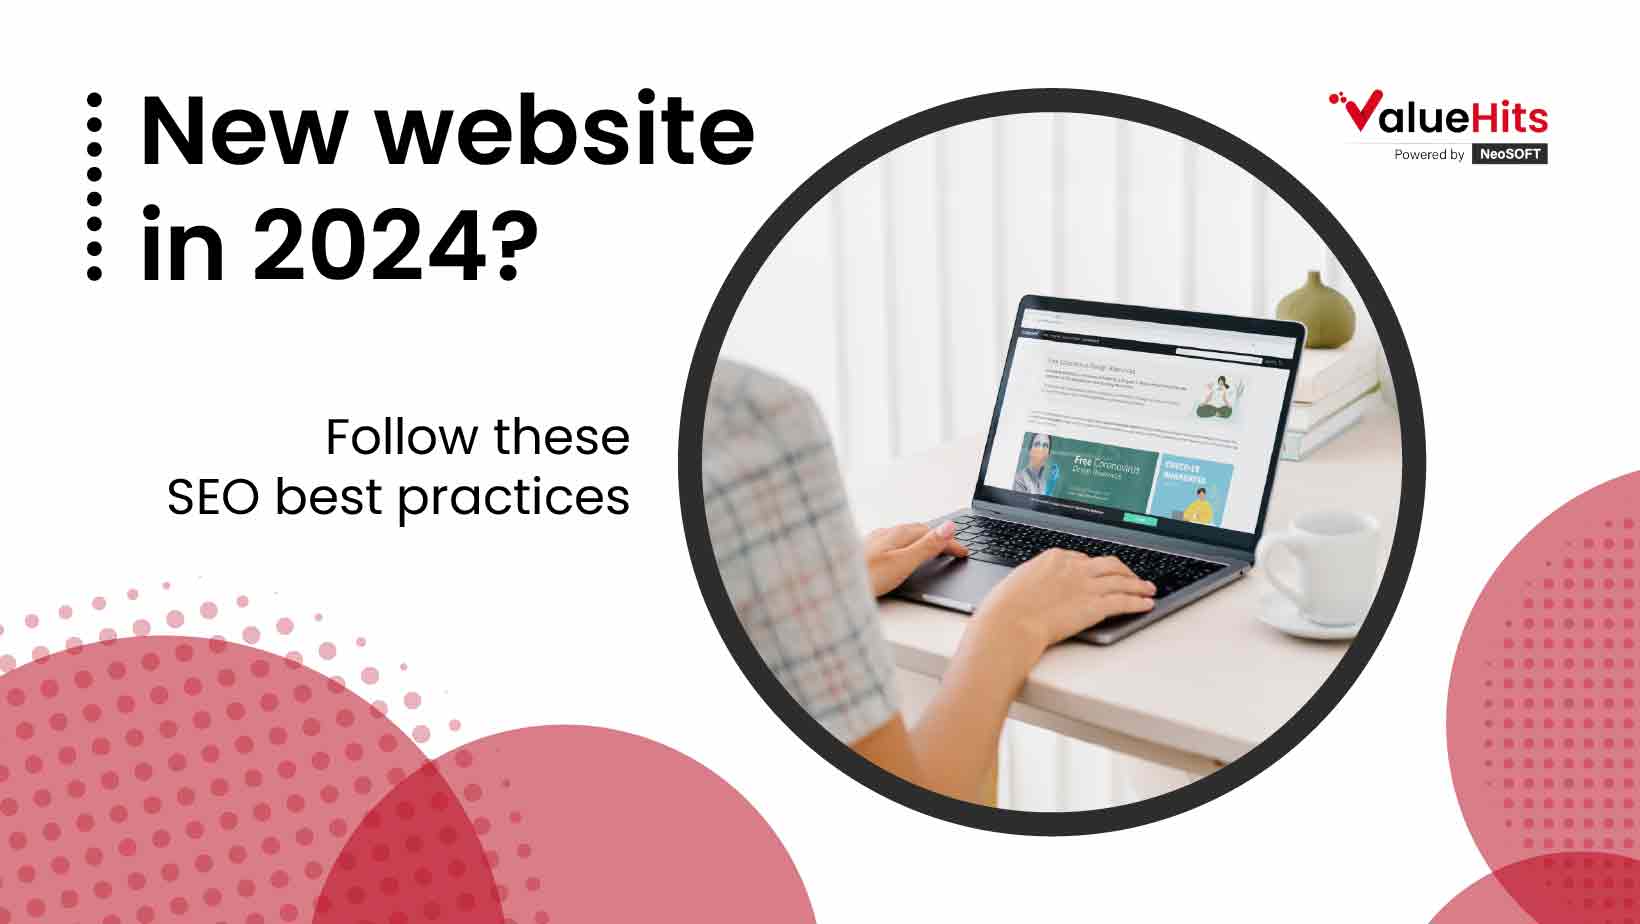 New website in 2024-Follow these SEO best practices.